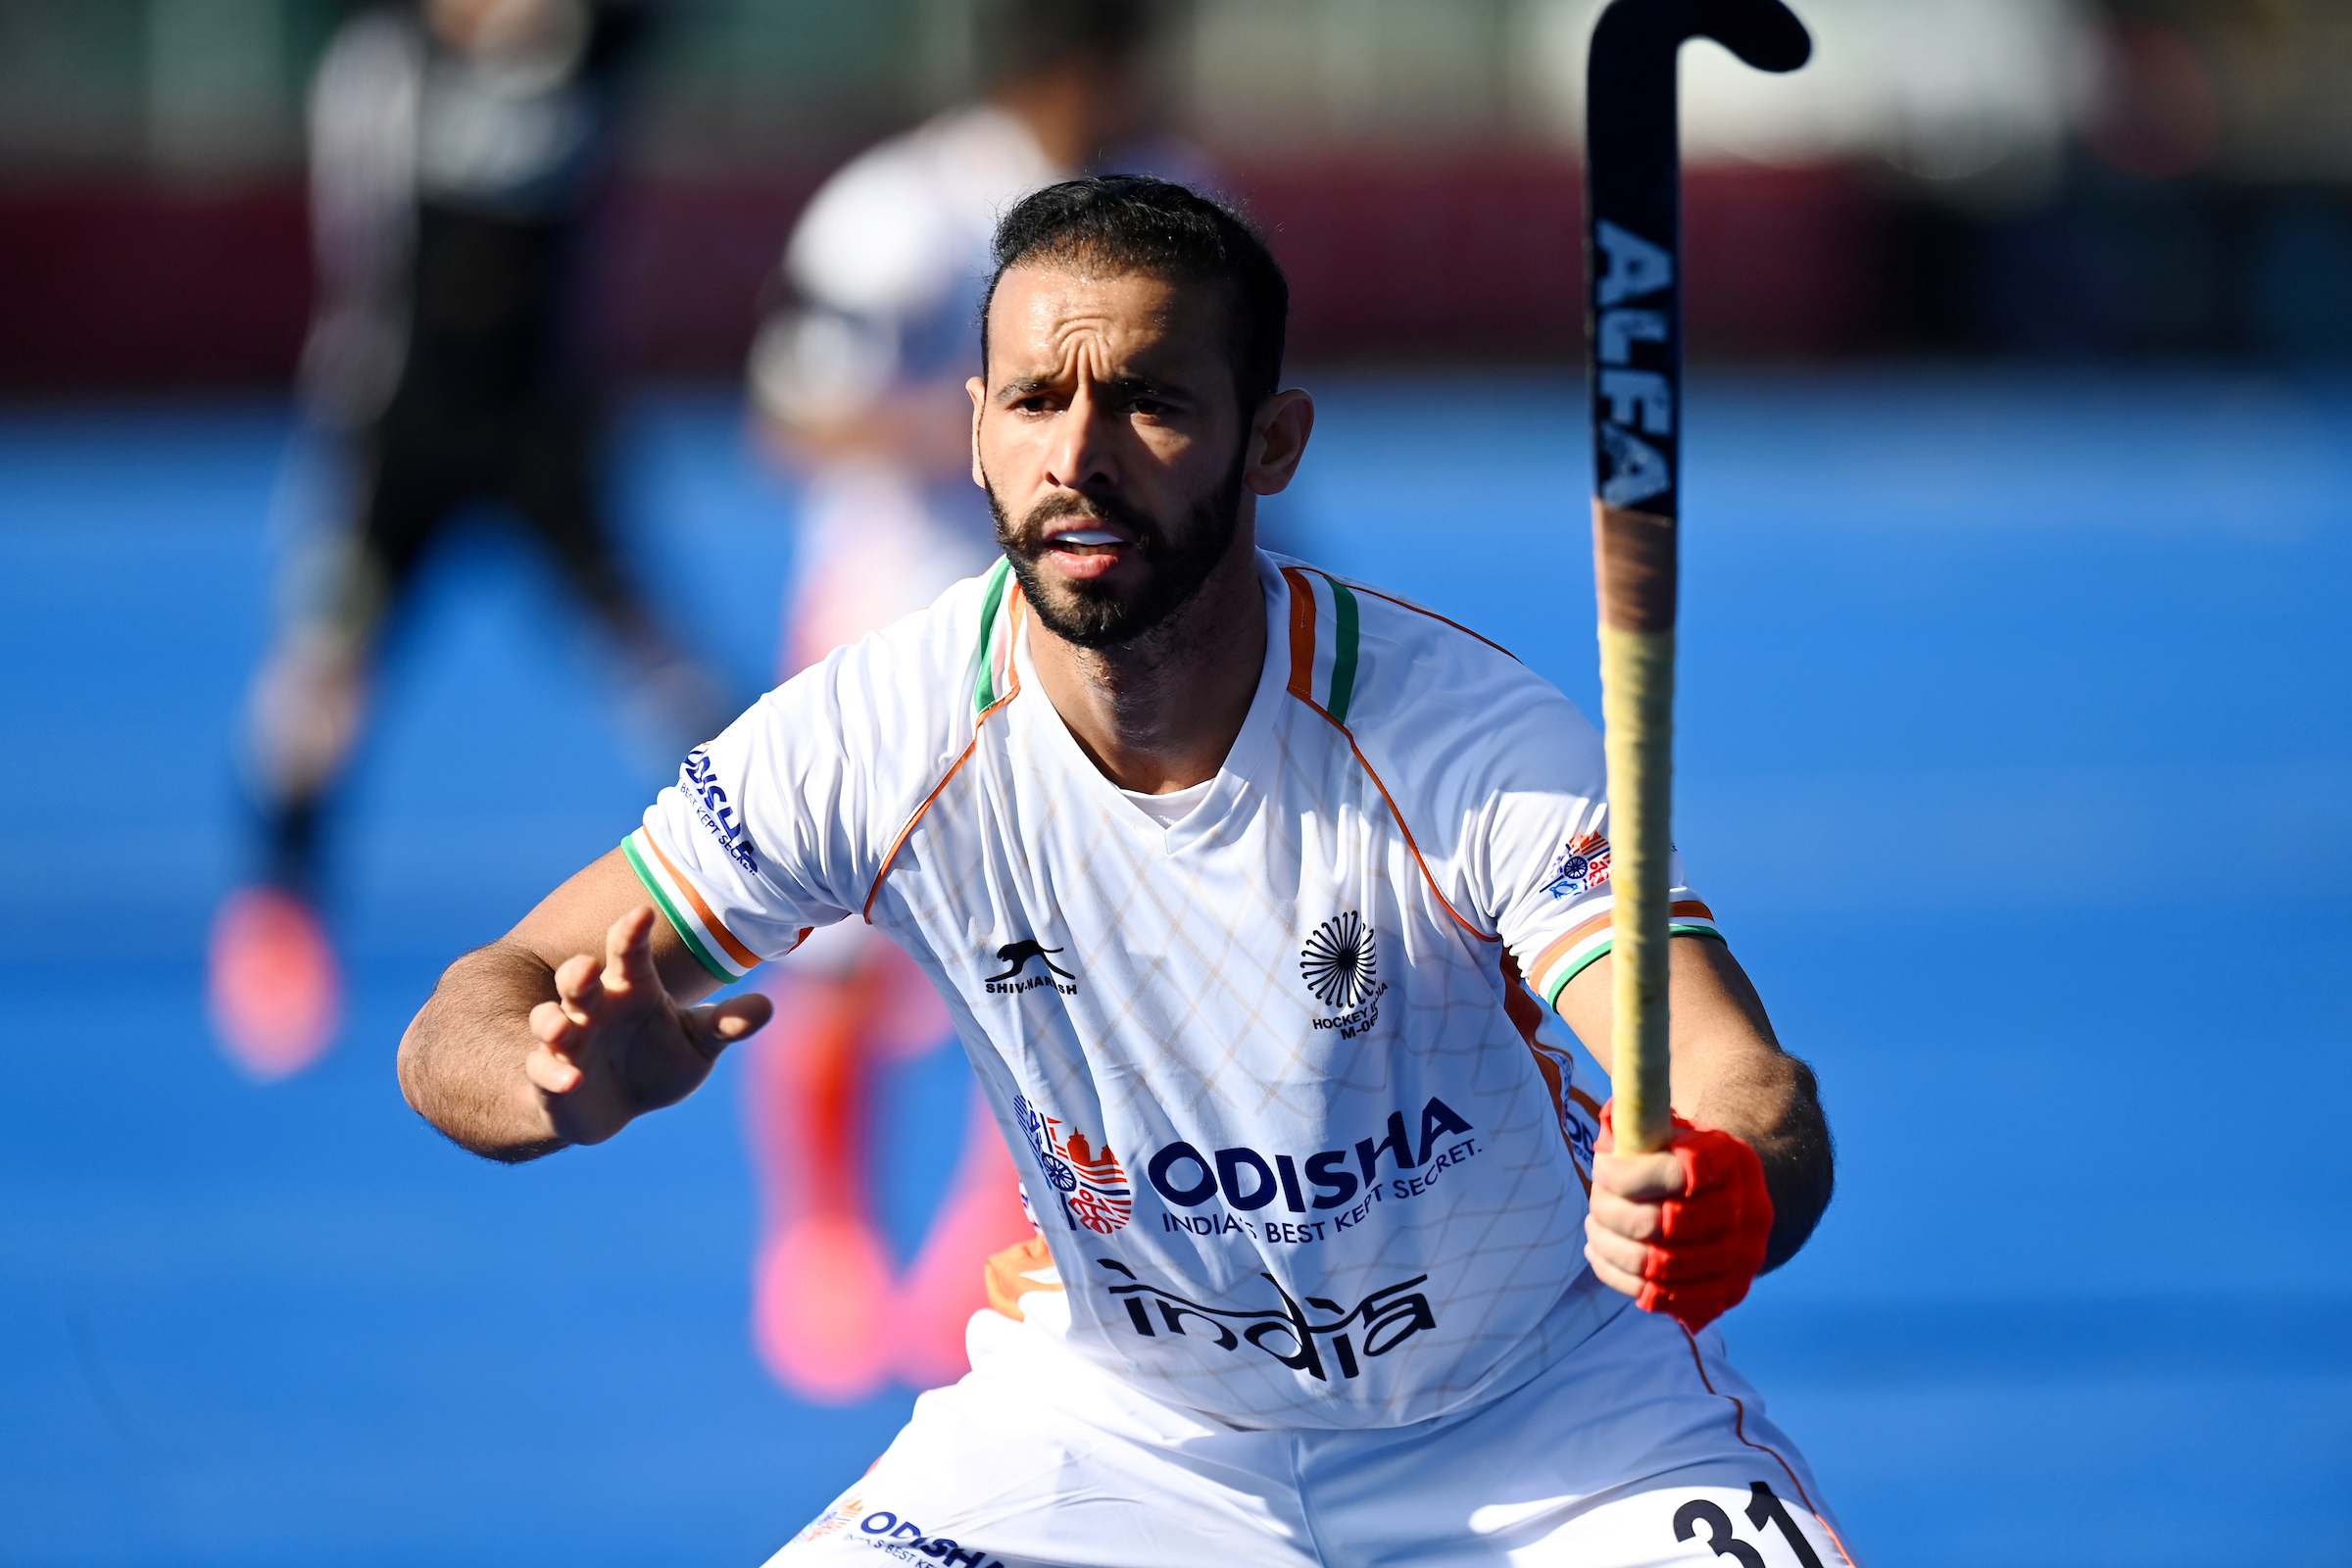 2020 Tokyo Olympics | Good show in the first match will give us momentum, asserts Ramandeep Singh